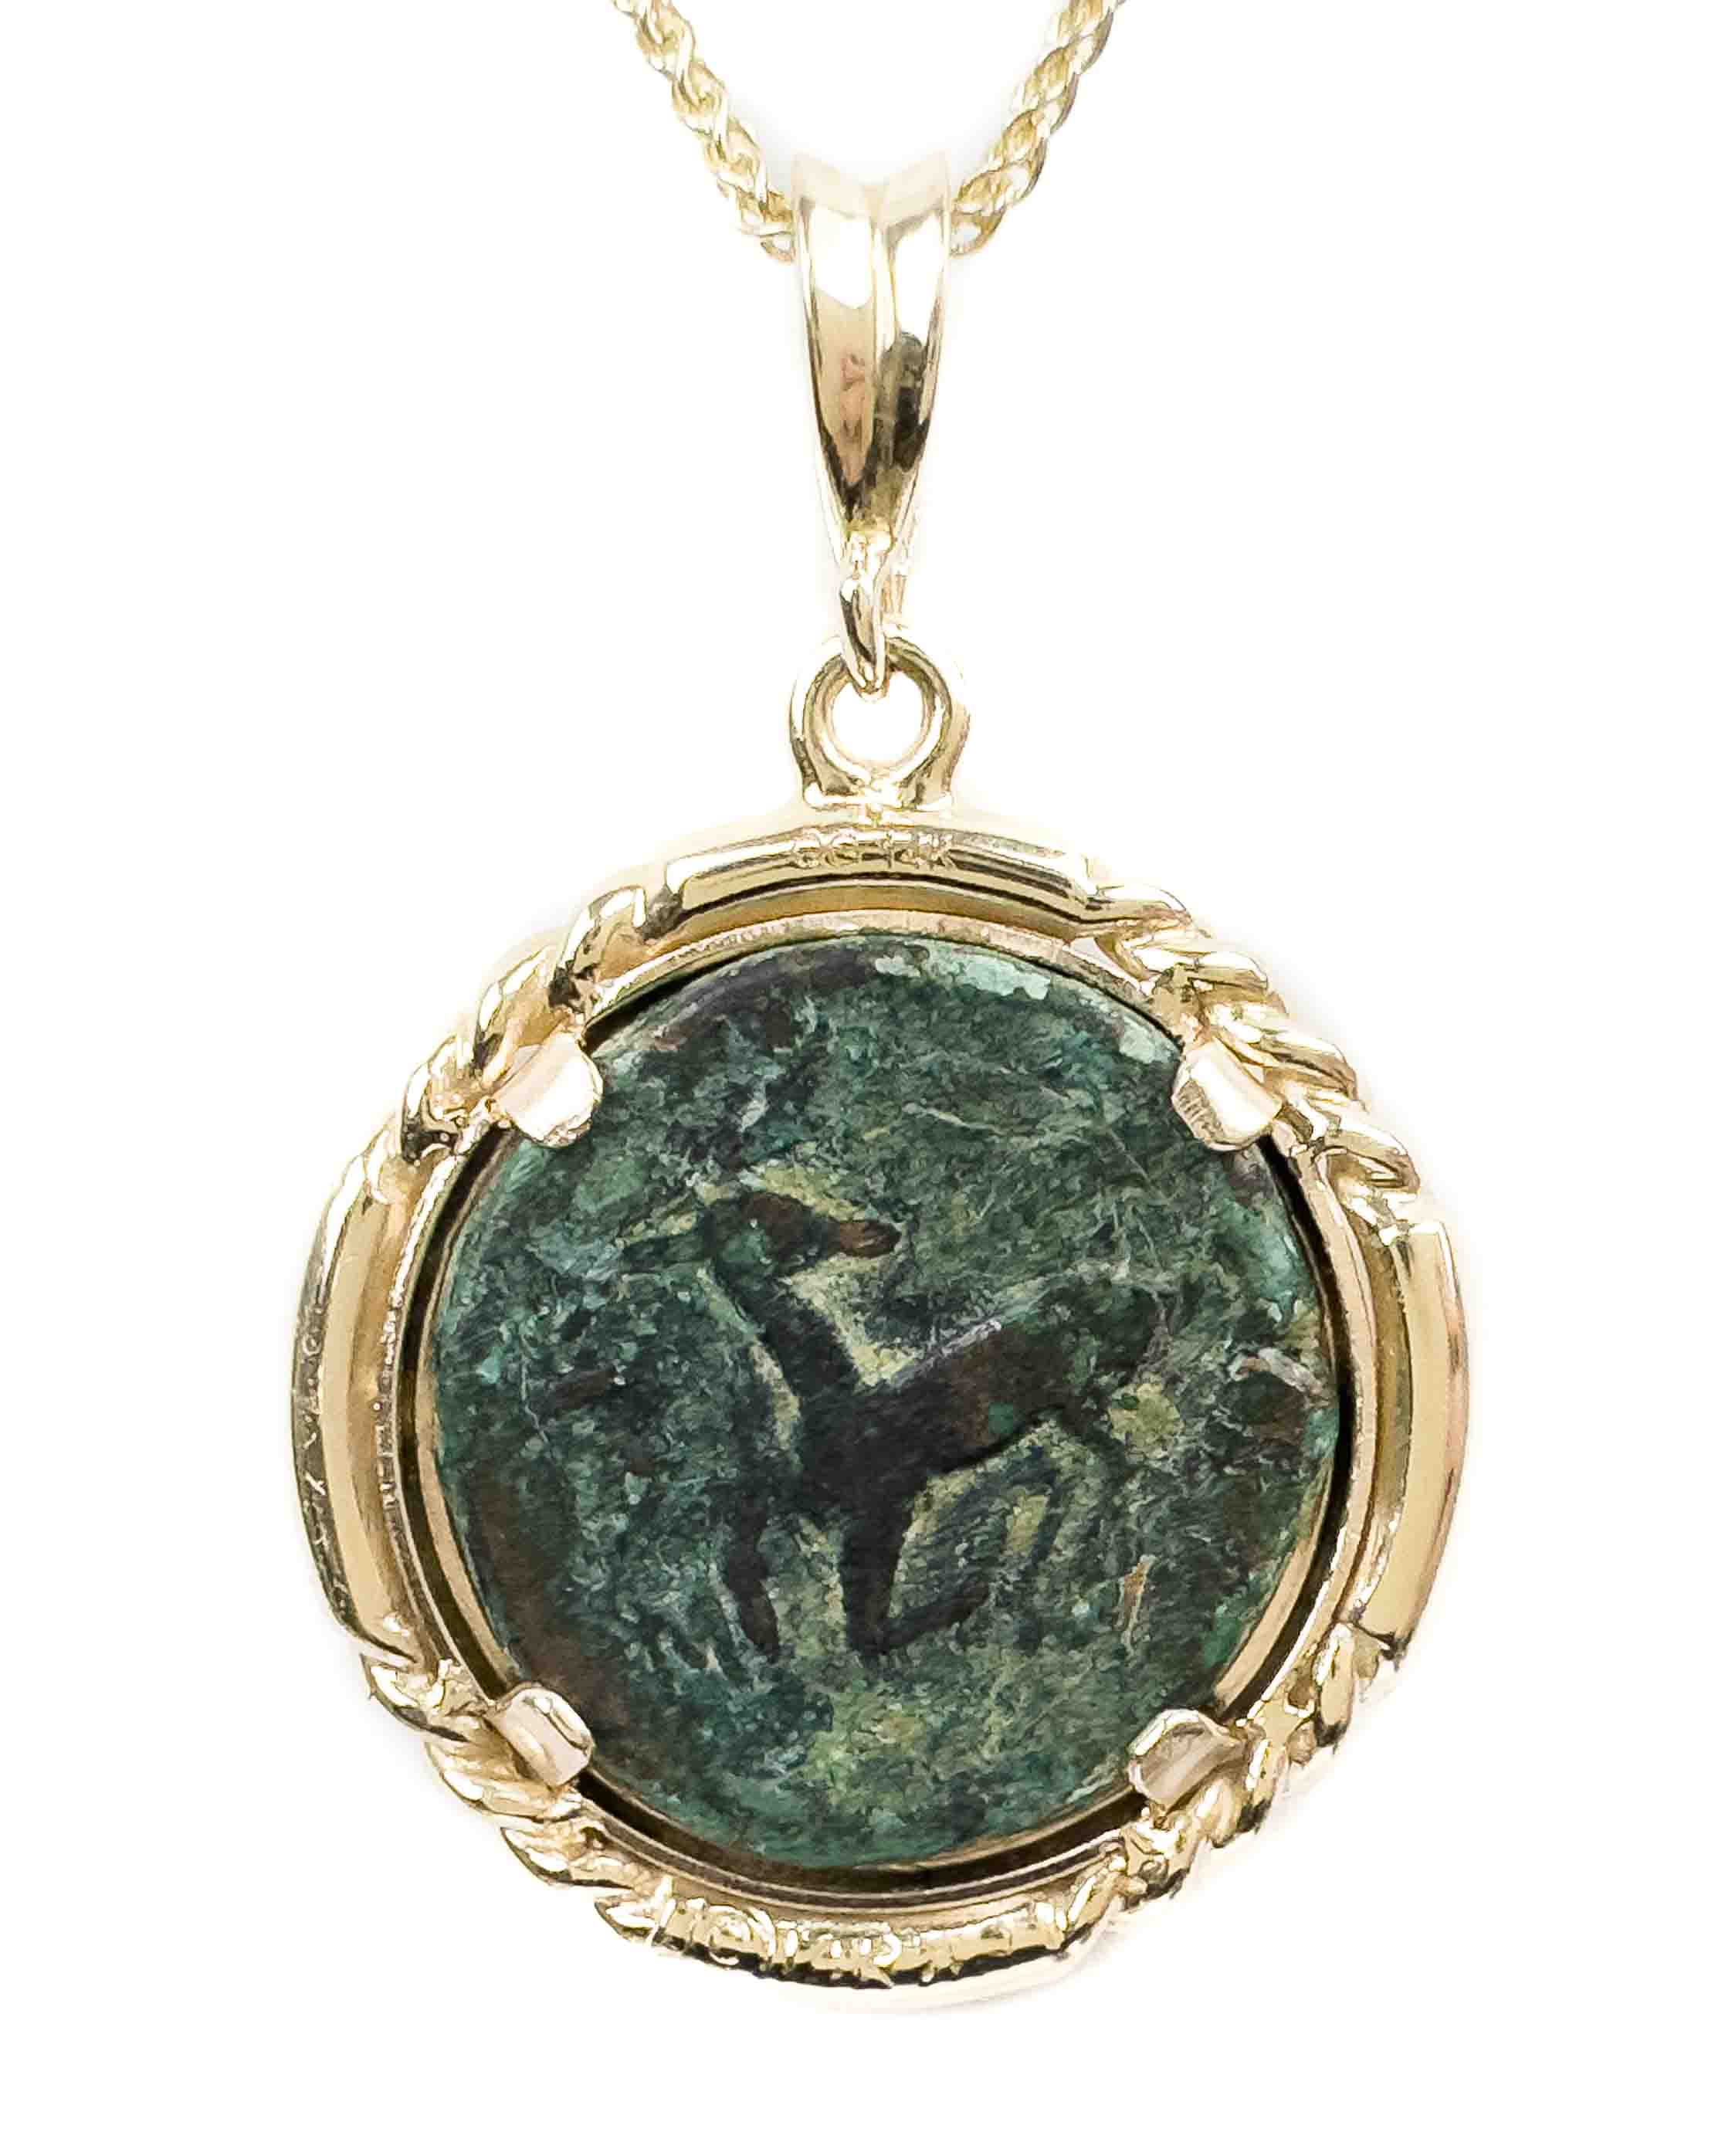 Ancient Greek Coin Pendant with Goddess Athena - GREEK ROOTS